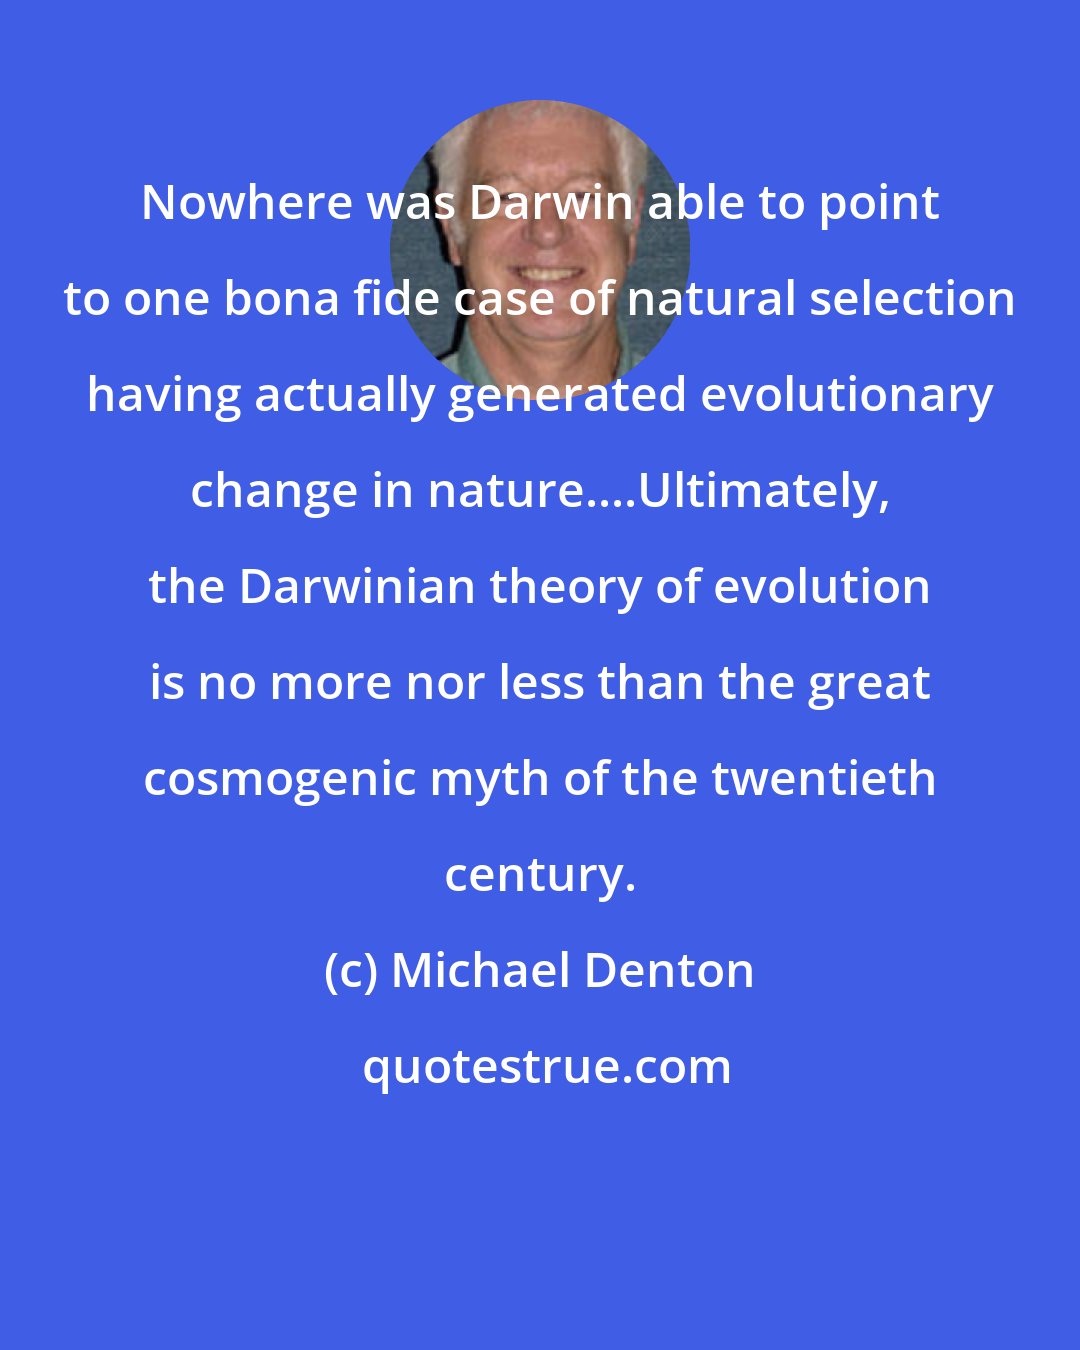 Michael Denton: Nowhere was Darwin able to point to one bona fide case of natural selection having actually generated evolutionary change in nature....Ultimately, the Darwinian theory of evolution is no more nor less than the great cosmogenic myth of the twentieth century.